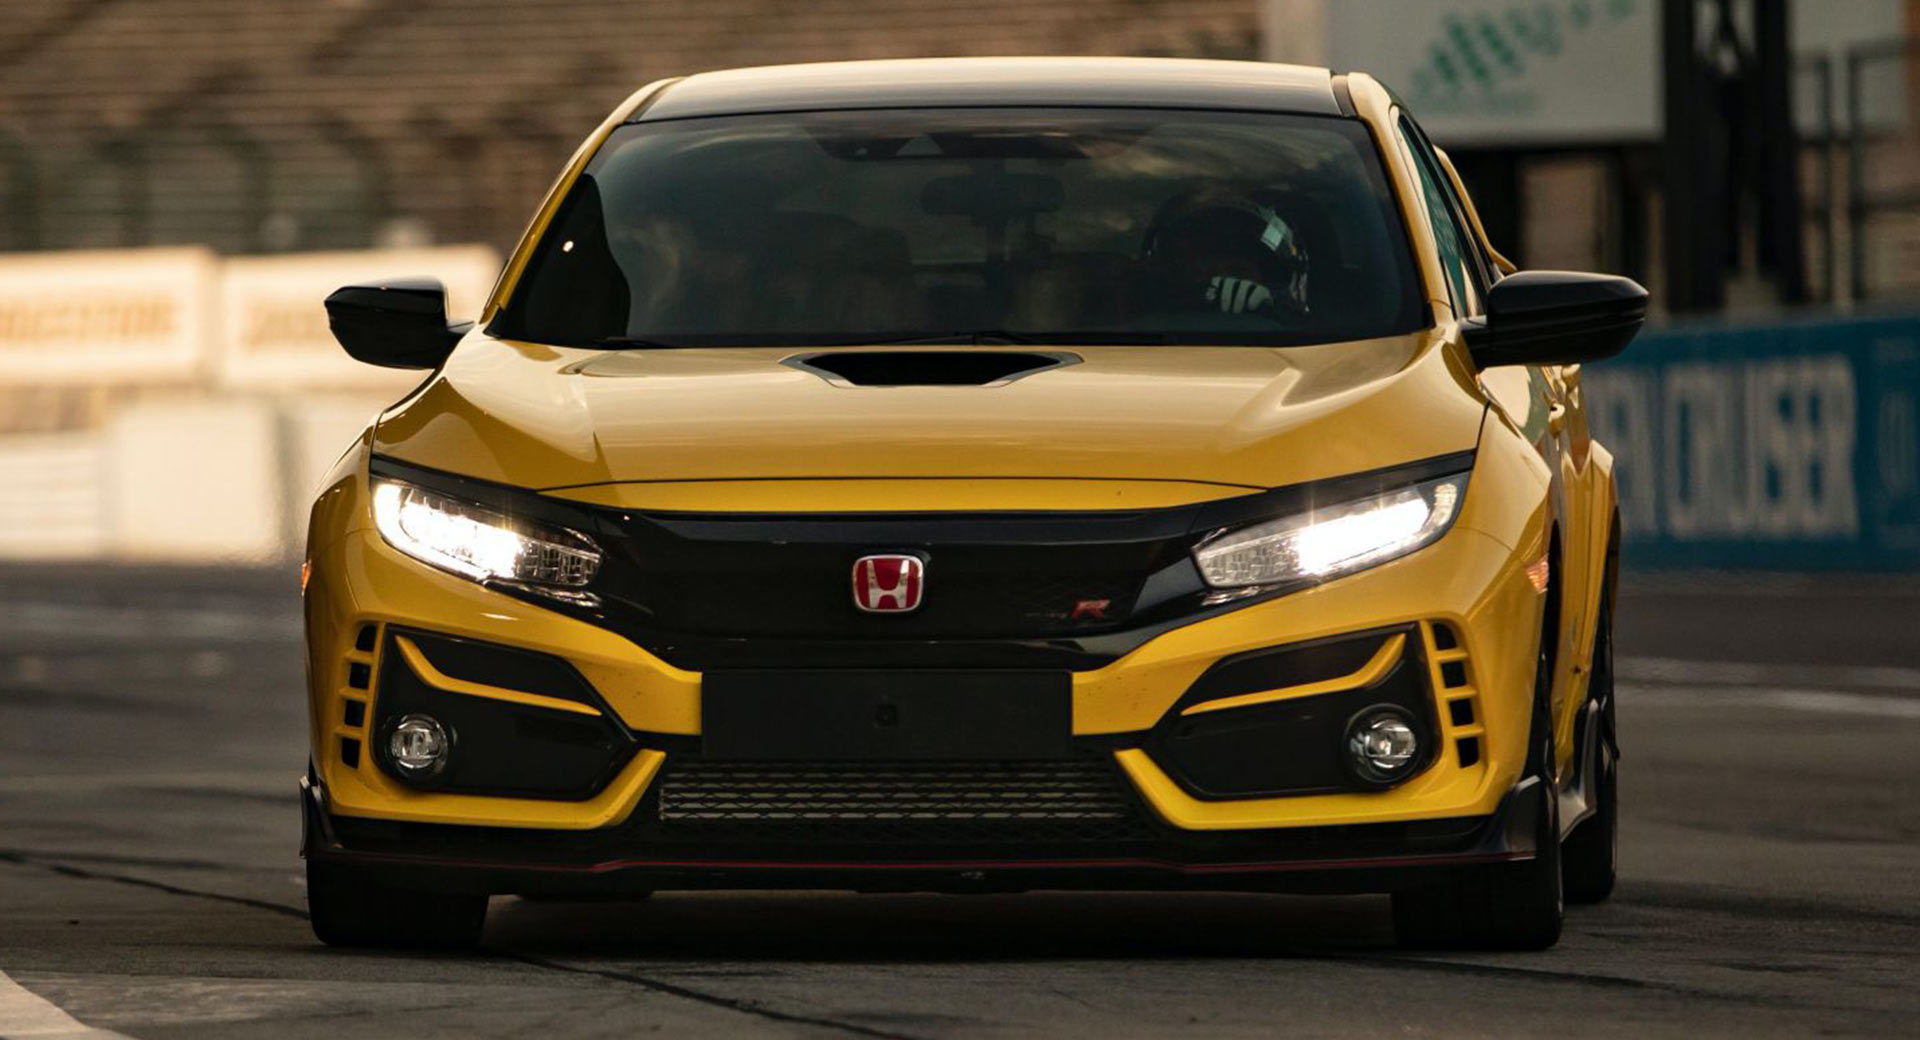 Watch In Awe As 2021 Honda Civic Type R Limited Edition Hits 180 MPH ...